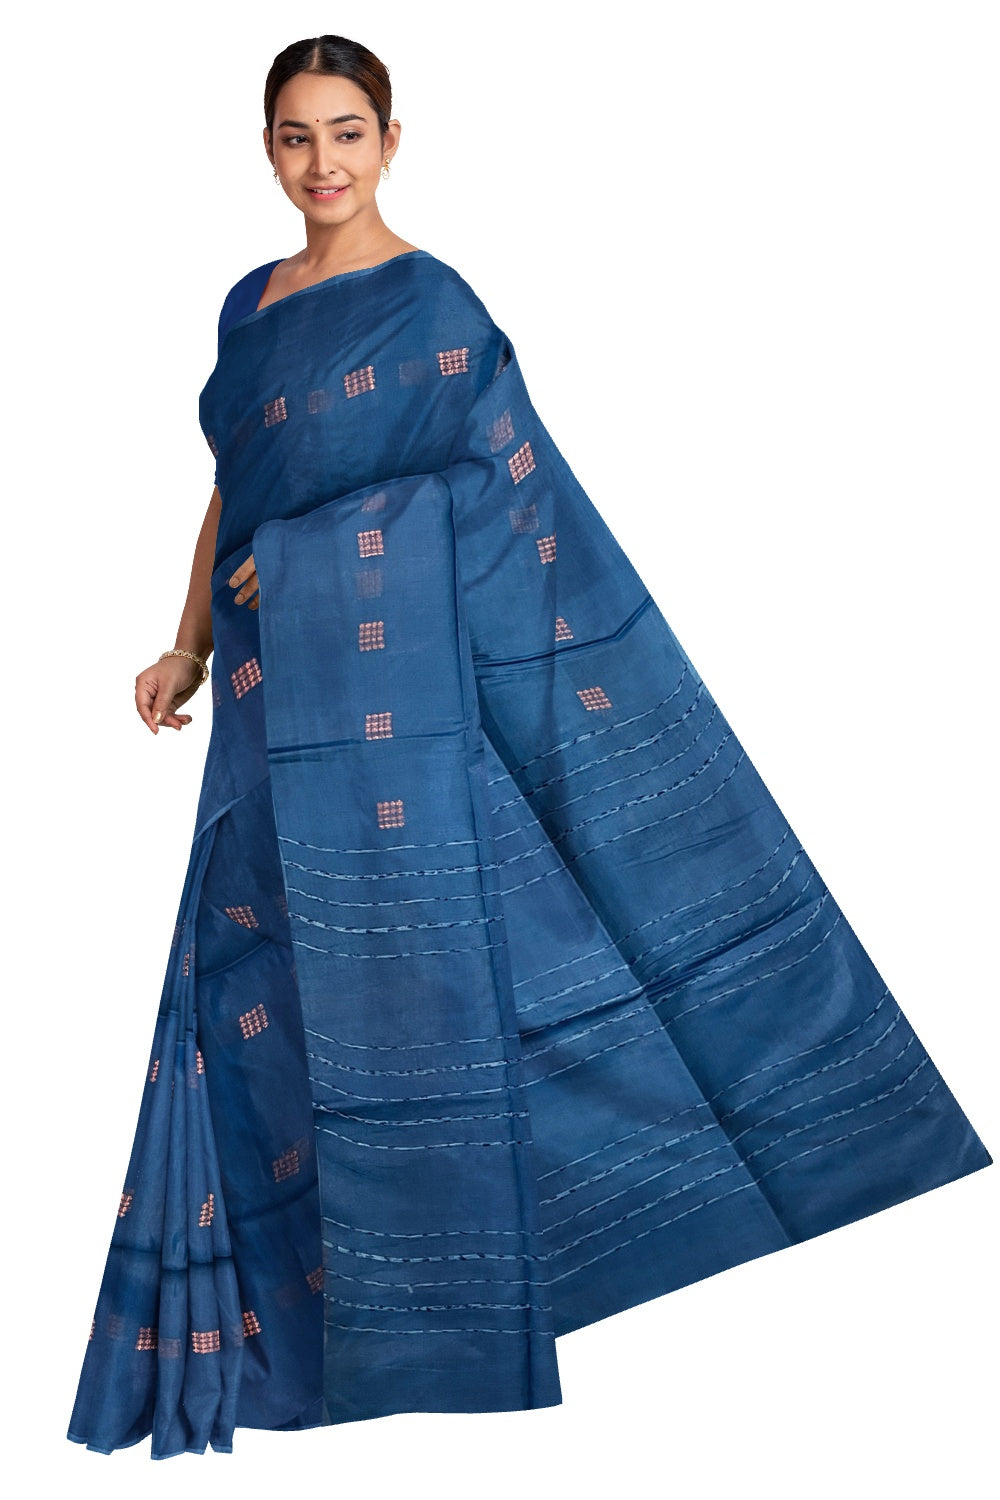 Southloom Cotton Blue Saree with Copper Butta Works on Body